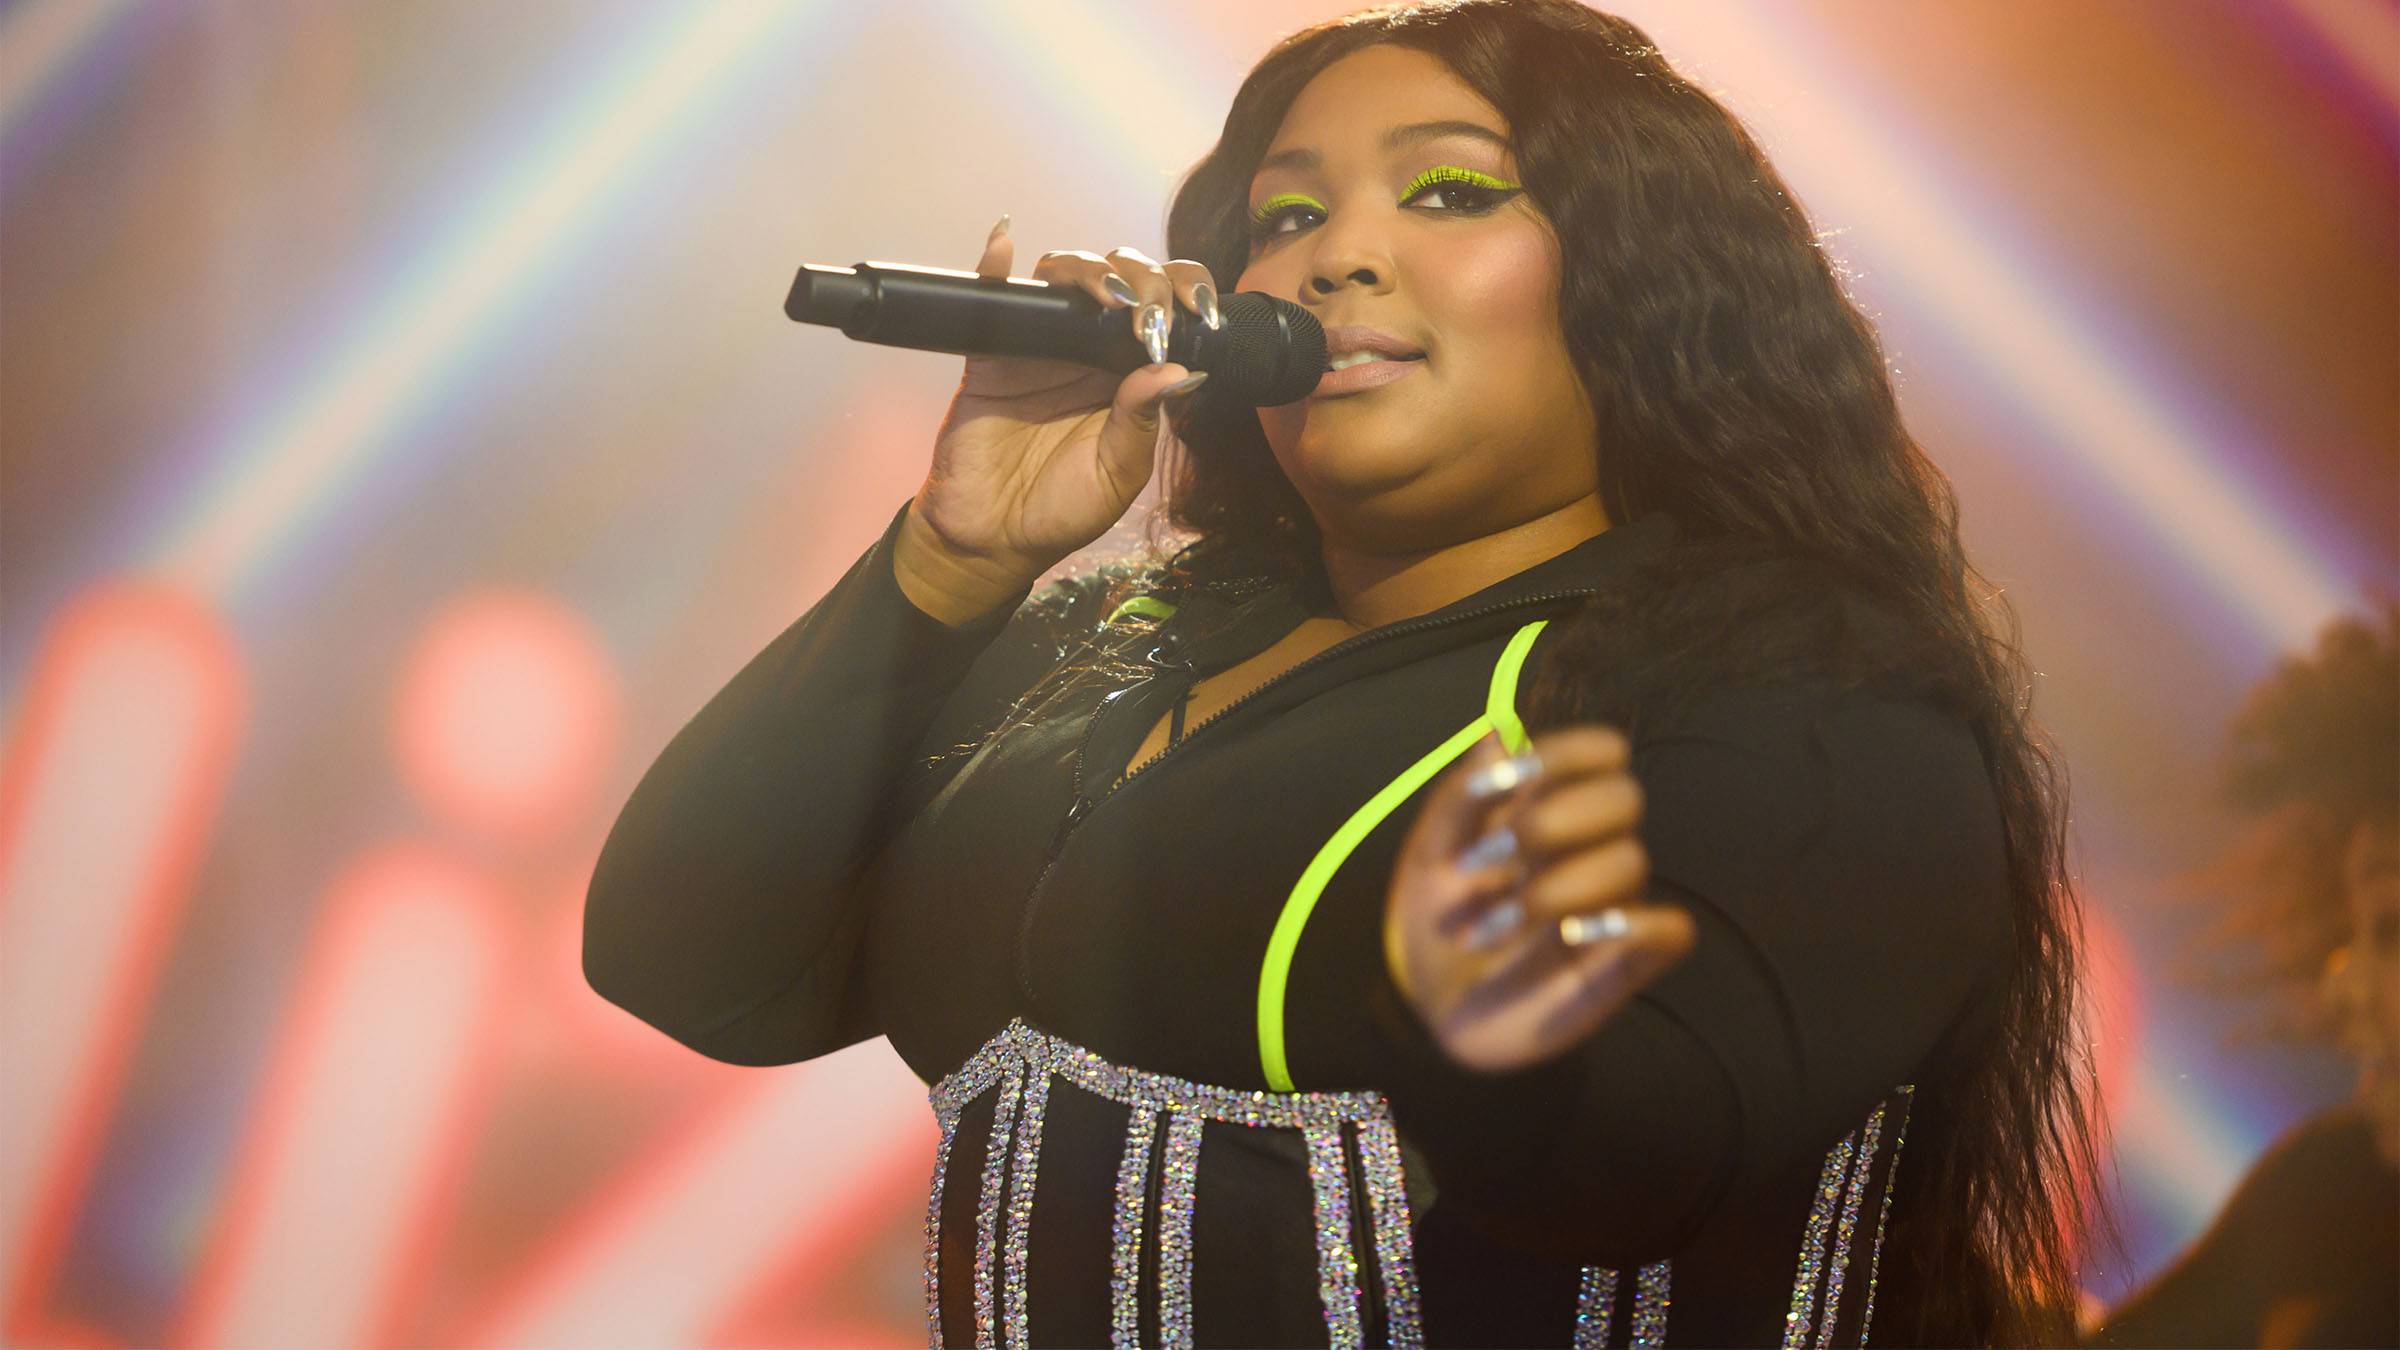 Lizzo Rocks Out on the Recorder in a 'Lord of the Rings' Inspired Post, News